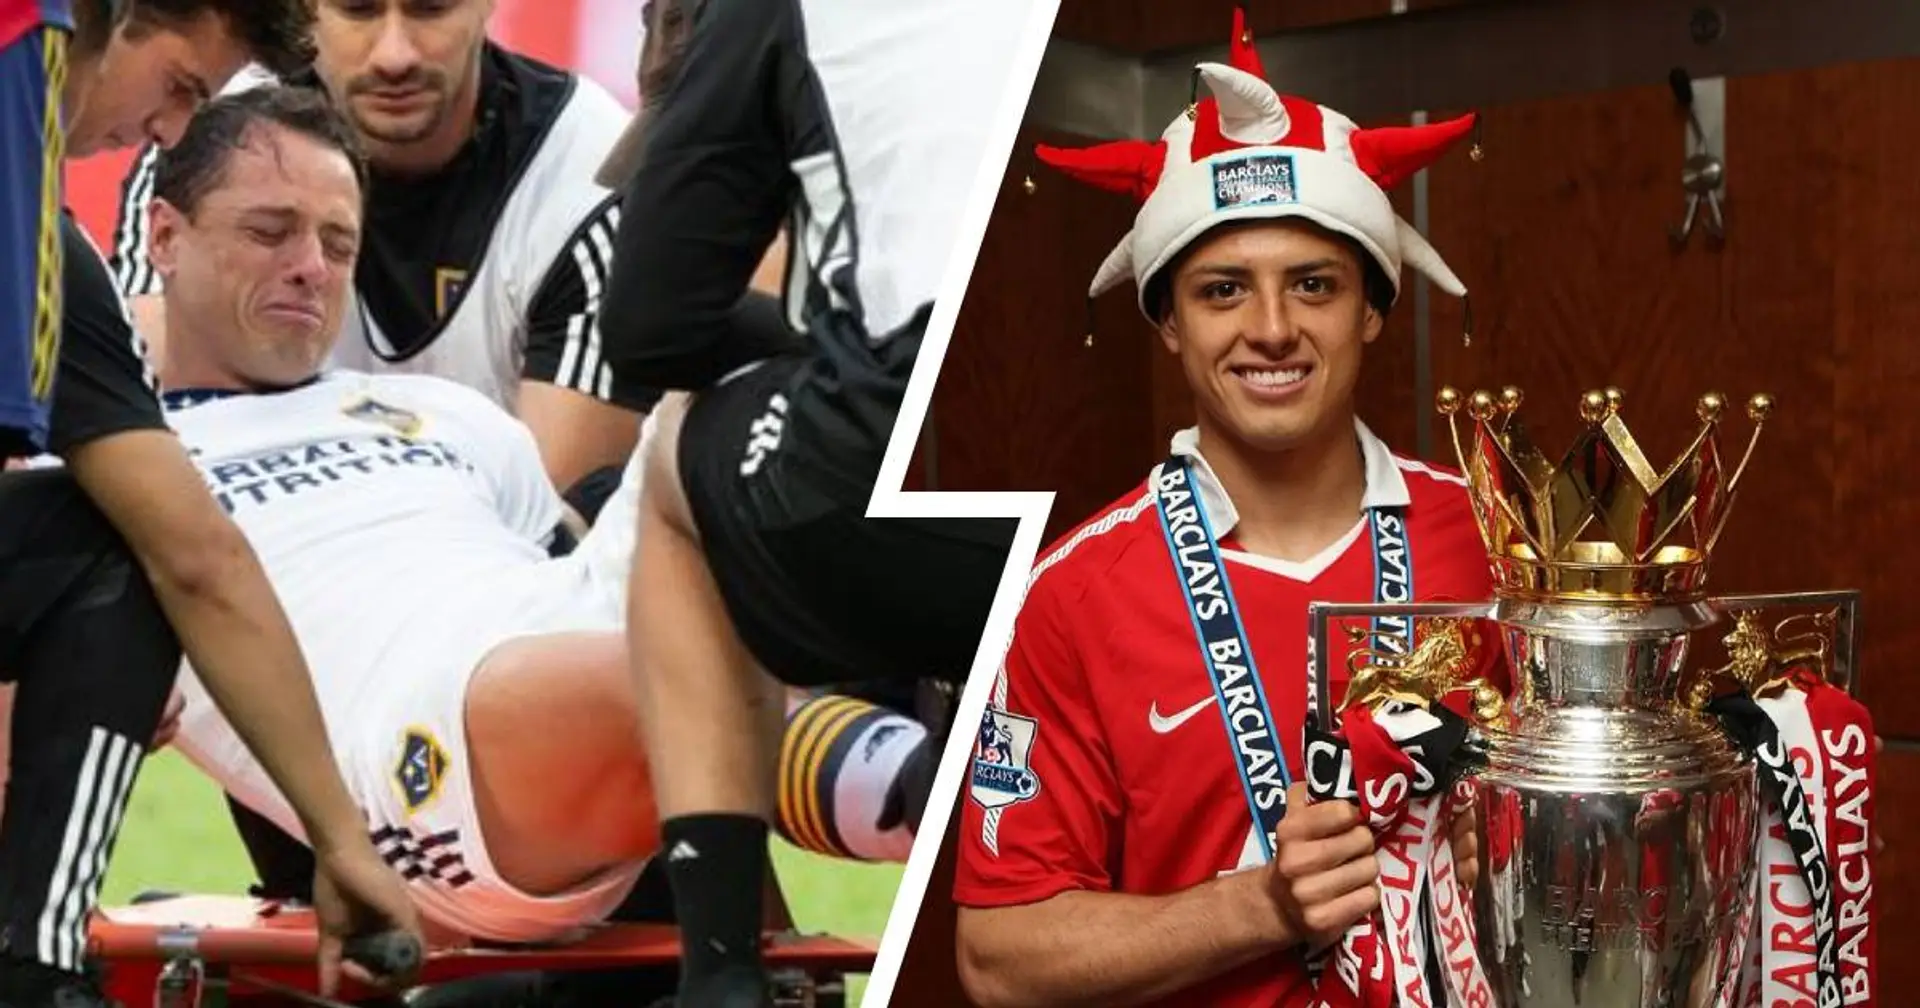 Javier Hernandez suffers horrific ACL injury which could end his career